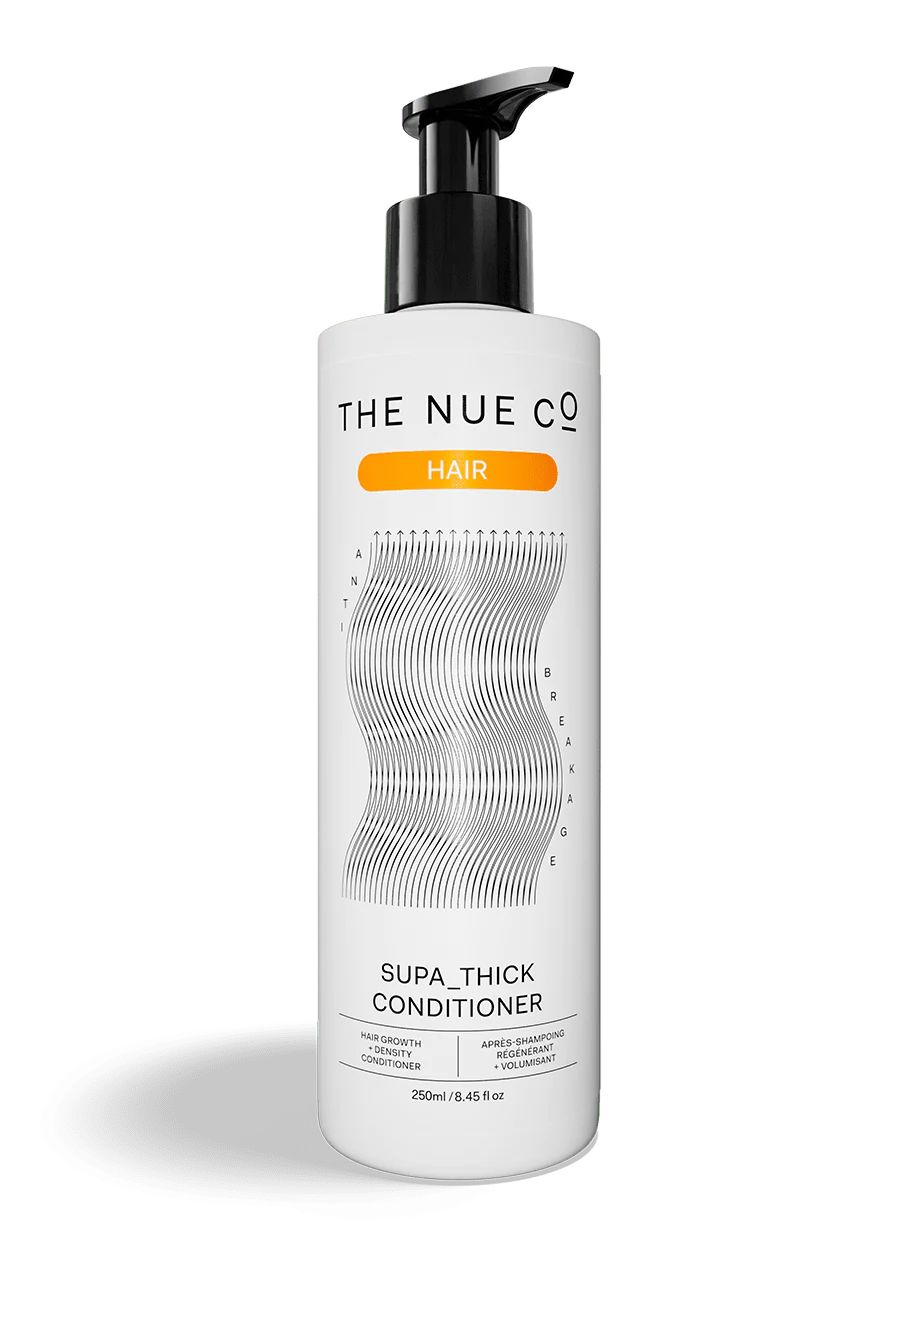 SUPA_THICK CONDITIONER | The Nue Co. US